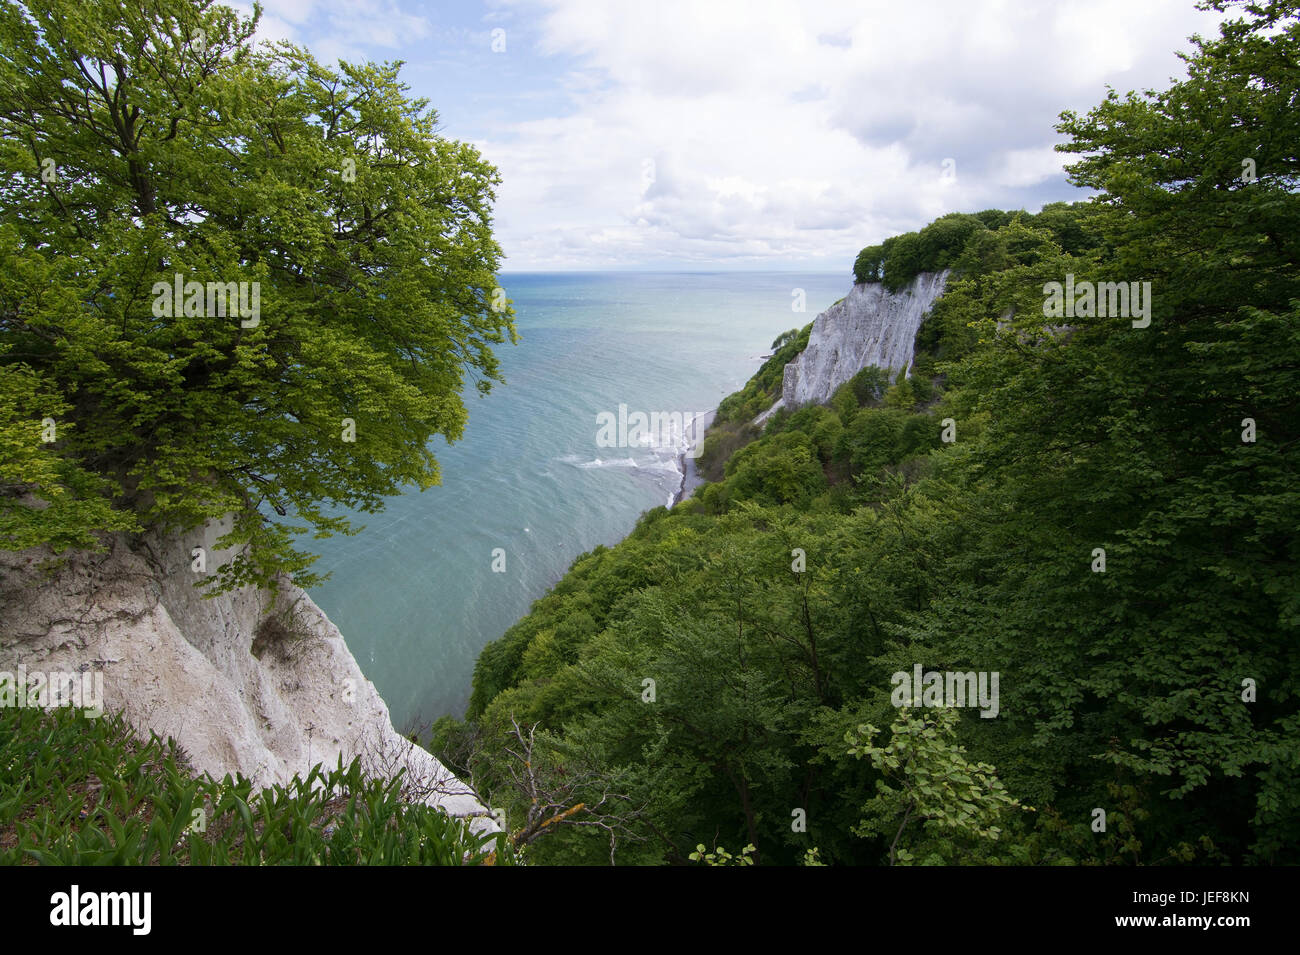 The king's chair is the most famous chalk rock formation of the Stubbenkammer in the national park Jasmund on the island R?gen, Der Königsstuhl ist di Stock Photo